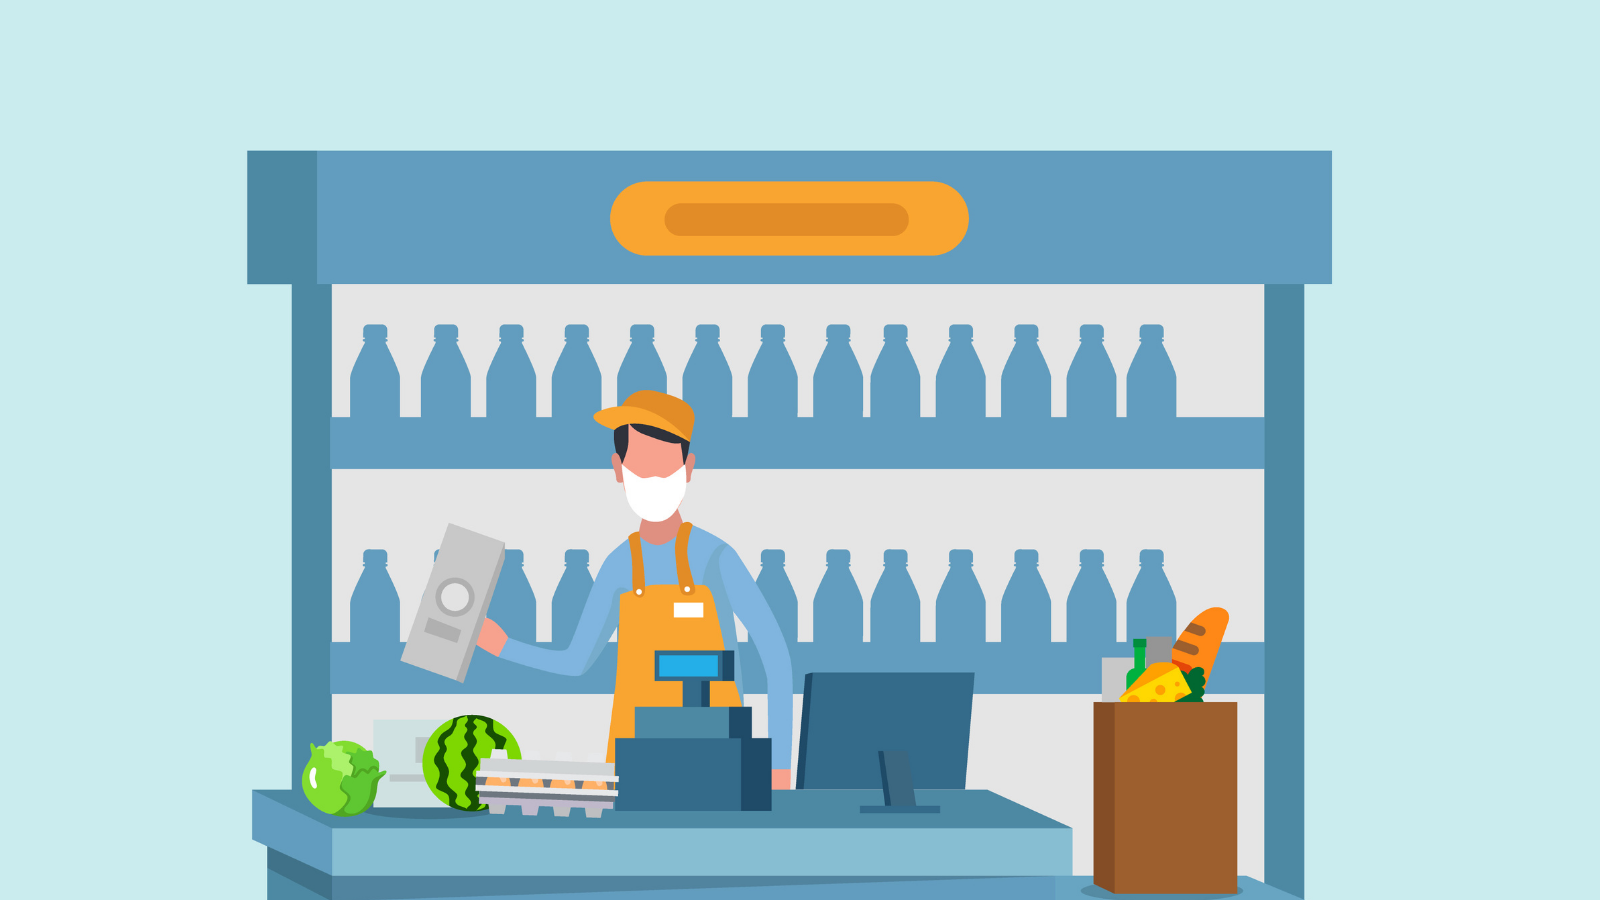 Key finding in 2021 on consumer behavior & COVID adjustments in convenience stores